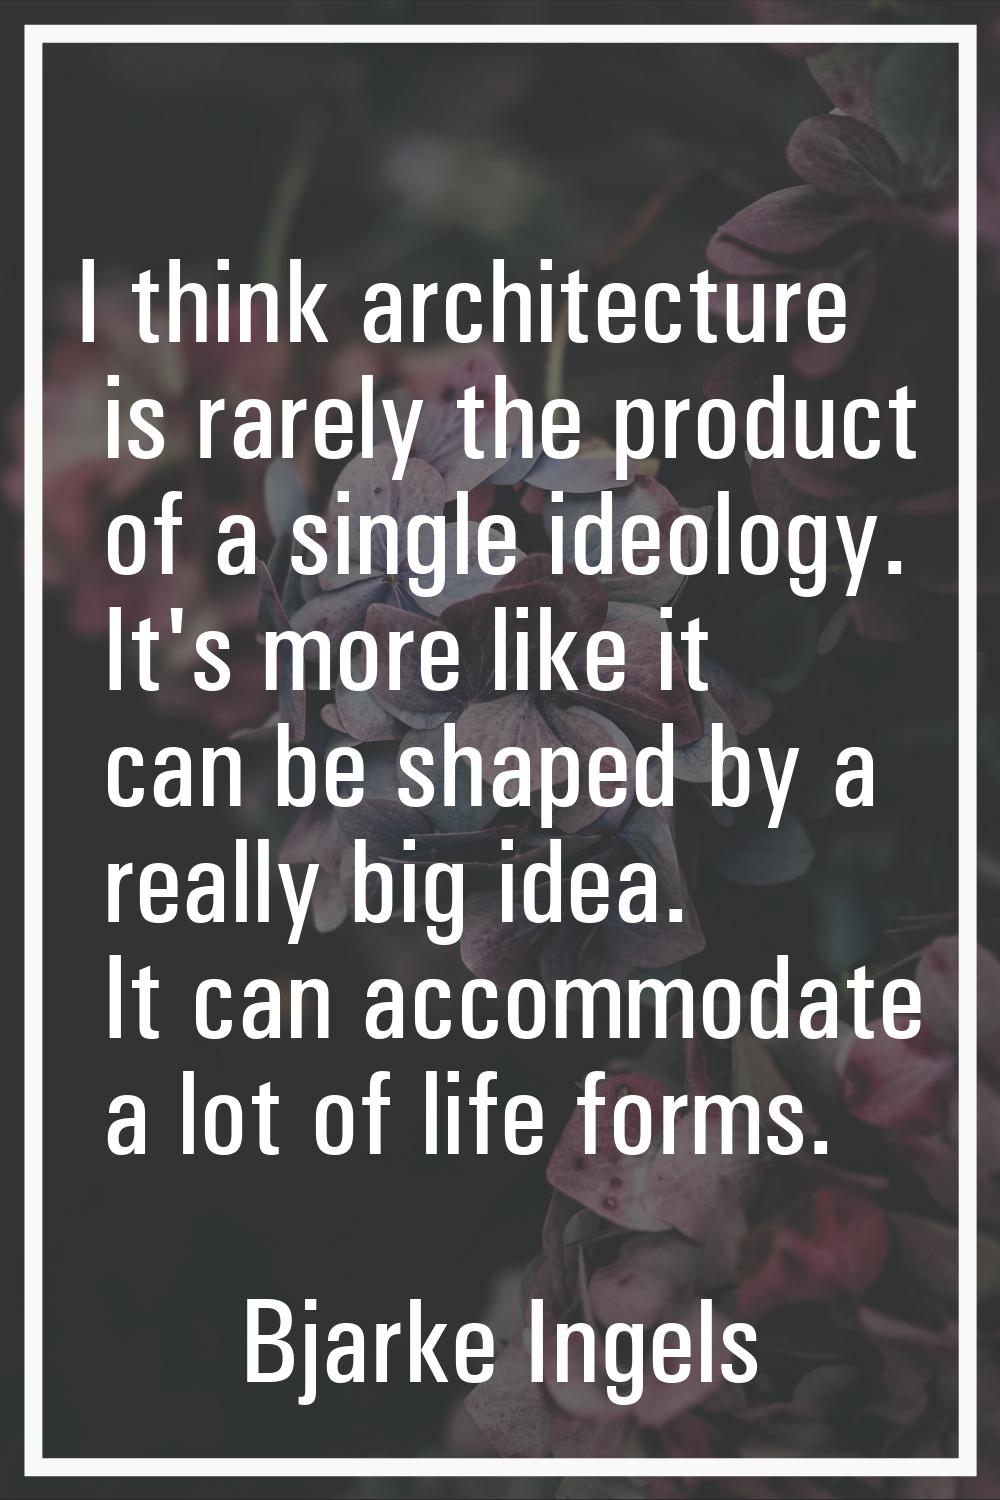 I think architecture is rarely the product of a single ideology. It's more like it can be shaped by